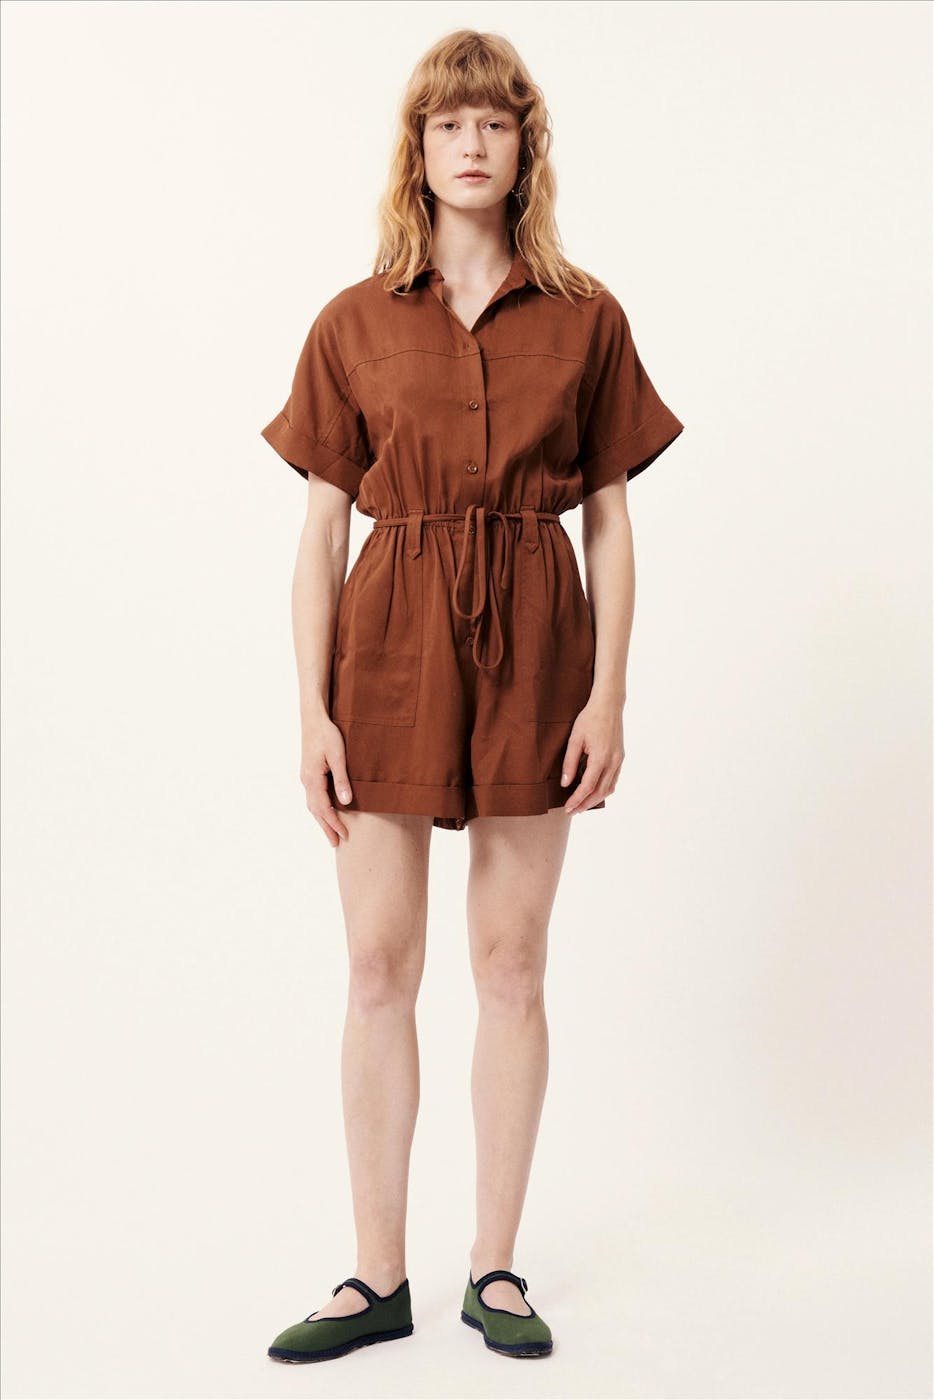 FRNCH - Bruine Lily playsuit